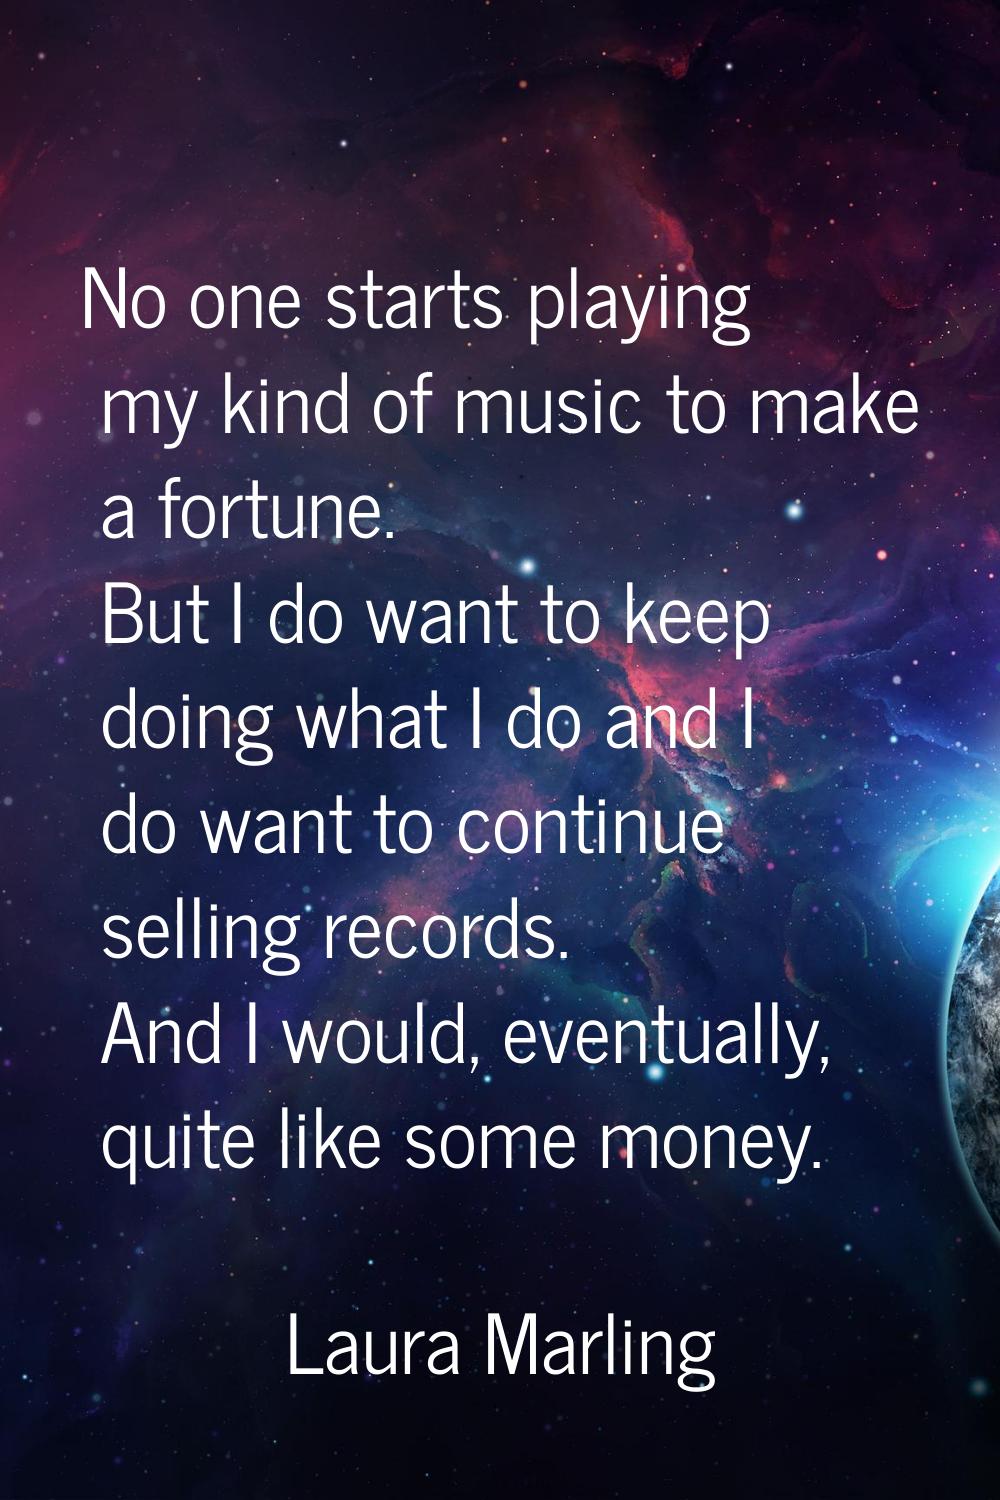 No one starts playing my kind of music to make a fortune. But I do want to keep doing what I do and